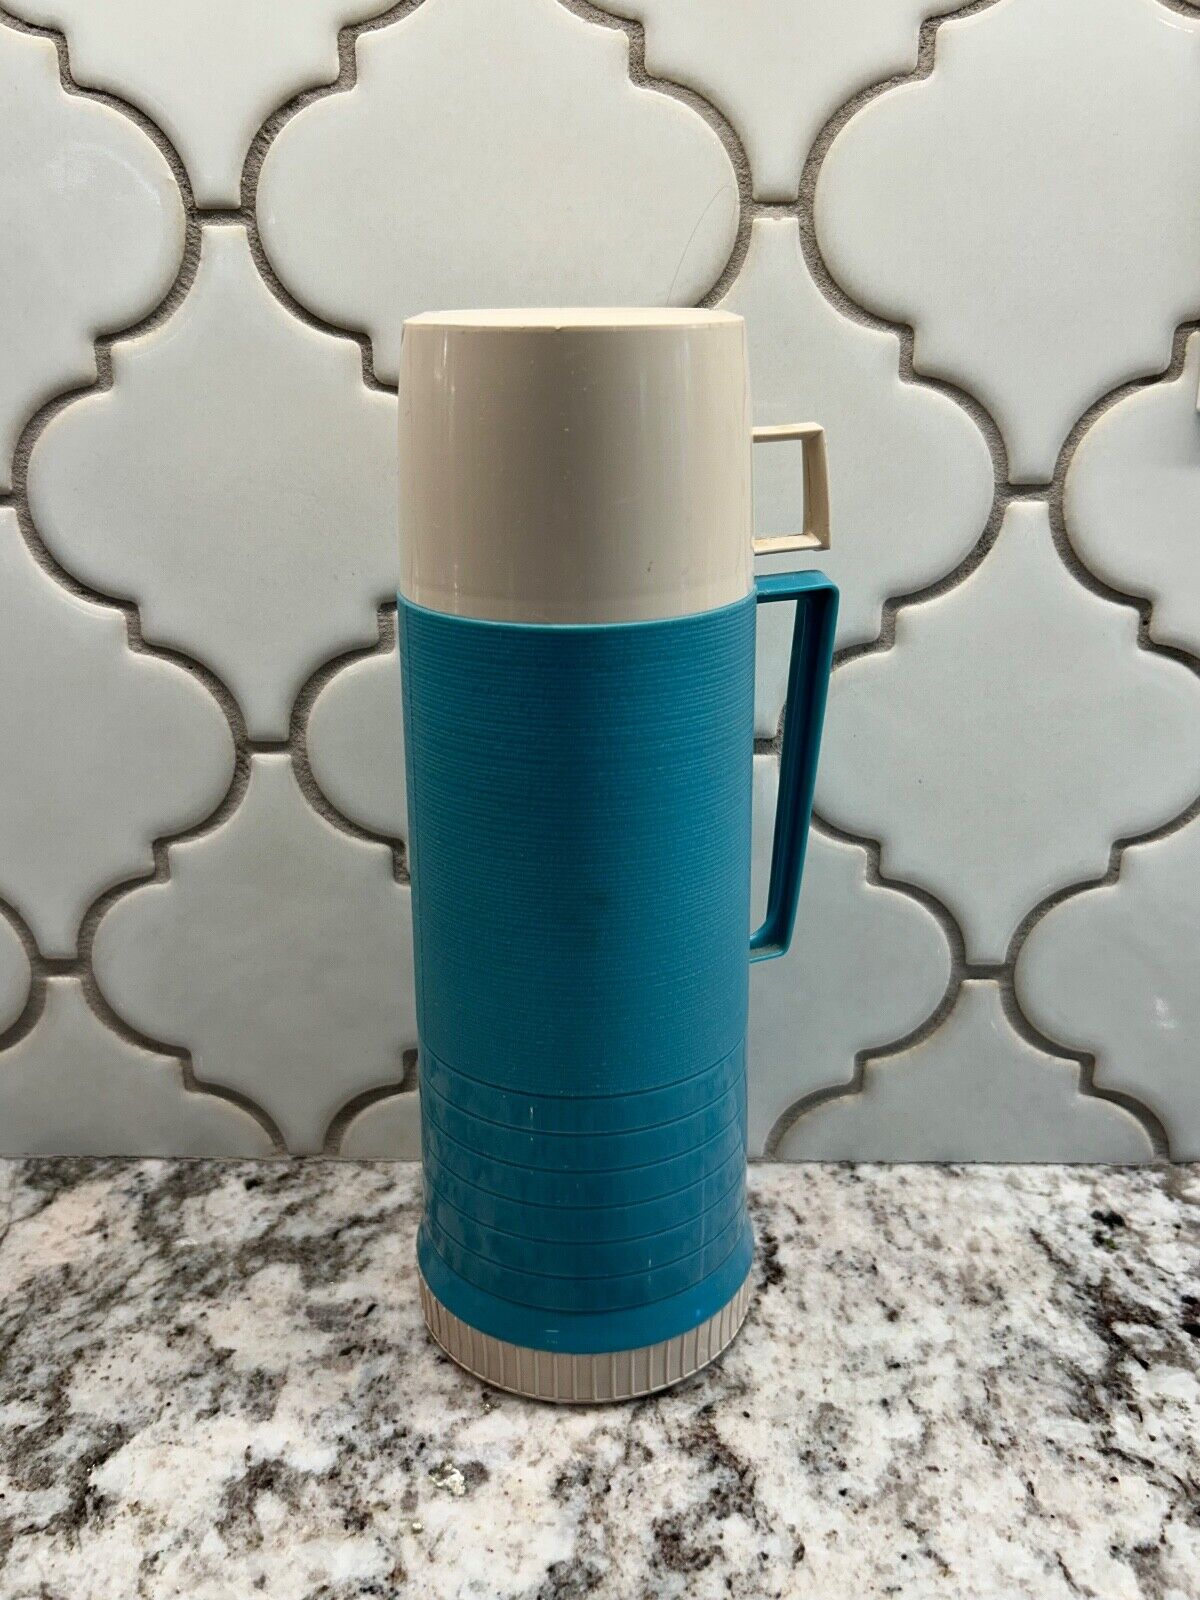 Vintage Thermos King Seeley blue 1970s made in USA